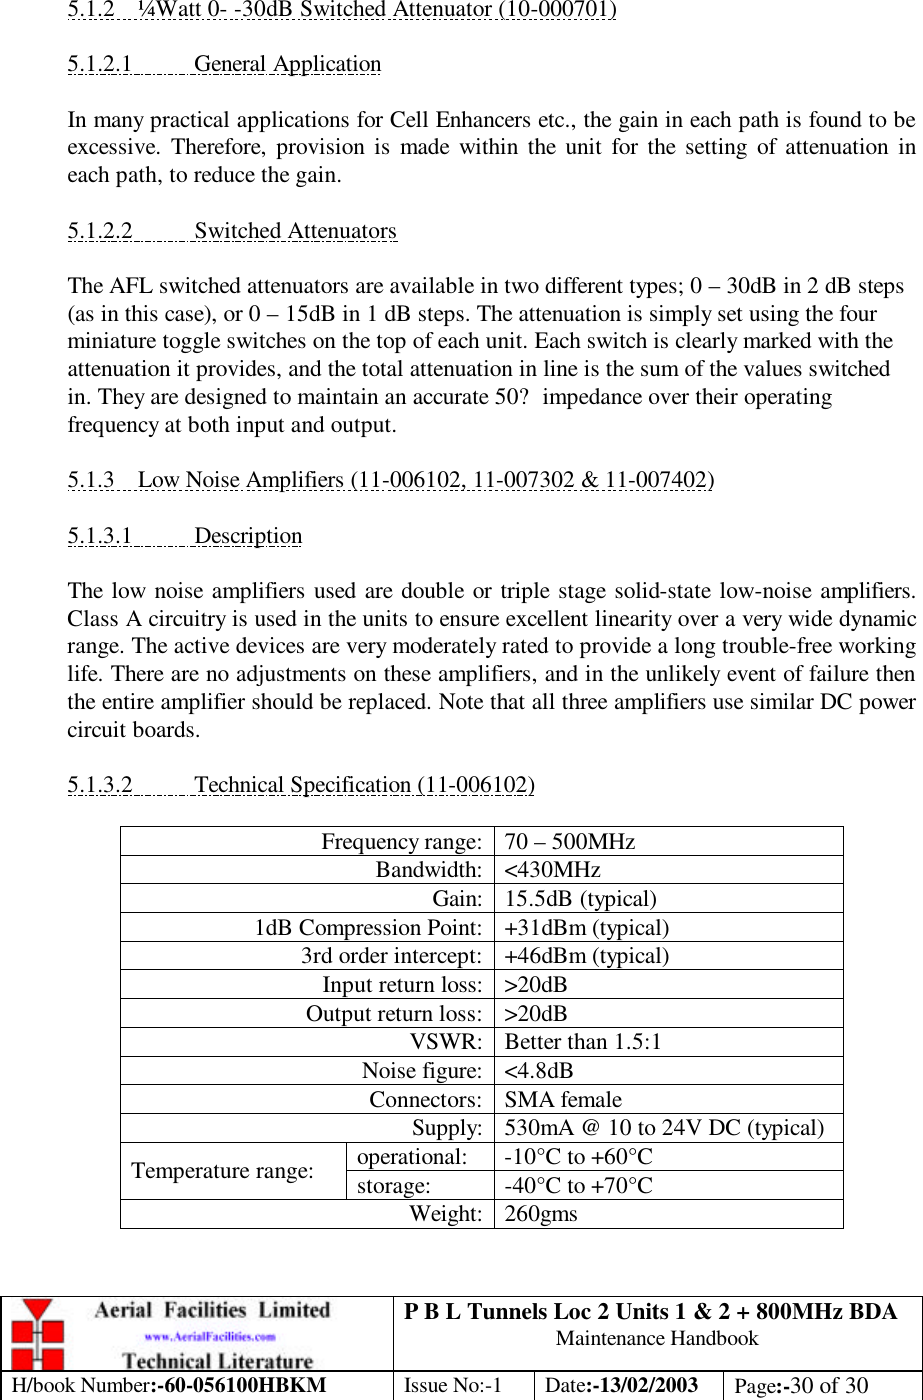 P B L Tunnels Loc 2 Units 1 &amp; 2 + 800MHz BDA Maintenance Handbook H/book Number:-60-056100HBKM Issue No:-1 Date:-13/02/2003 Page:-30 of 30   5.1.2 ¼Watt 0- -30dB Switched Attenuator (10-000701)  5.1.2.1 General Application  In many practical applications for Cell Enhancers etc., the gain in each path is found to be excessive. Therefore, provision is made within the unit for the setting of attenuation in each path, to reduce the gain.  5.1.2.2 Switched Attenuators  The AFL switched attenuators are available in two different types; 0 – 30dB in 2 dB steps (as in this case), or 0 – 15dB in 1 dB steps. The attenuation is simply set using the four miniature toggle switches on the top of each unit. Each switch is clearly marked with the attenuation it provides, and the total attenuation in line is the sum of the values switched in. They are designed to maintain an accurate 50? impedance over their operating frequency at both input and output.  5.1.3 Low Noise Amplifiers (11-006102, 11-007302 &amp; 11-007402)  5.1.3.1 Description  The low noise amplifiers used are double or triple stage solid-state low-noise amplifiers. Class A circuitry is used in the units to ensure excellent linearity over a very wide dynamic range. The active devices are very moderately rated to provide a long trouble-free working life. There are no adjustments on these amplifiers, and in the unlikely event of failure then the entire amplifier should be replaced. Note that all three amplifiers use similar DC power circuit boards.  5.1.3.2 Technical Specification (11-006102)  Frequency range: 70 – 500MHz Bandwidth: &lt;430MHz Gain: 15.5dB (typical) 1dB Compression Point: +31dBm (typical) 3rd order intercept: +46dBm (typical) Input return loss: &gt;20dB Output return loss: &gt;20dB VSWR: Better than 1.5:1 Noise figure: &lt;4.8dB Connectors: SMA female Supply: 530mA @ 10 to 24V DC (typical) operational: -10°C to +60°C Temperature range: storage: -40°C to +70°C Weight: 260gms 